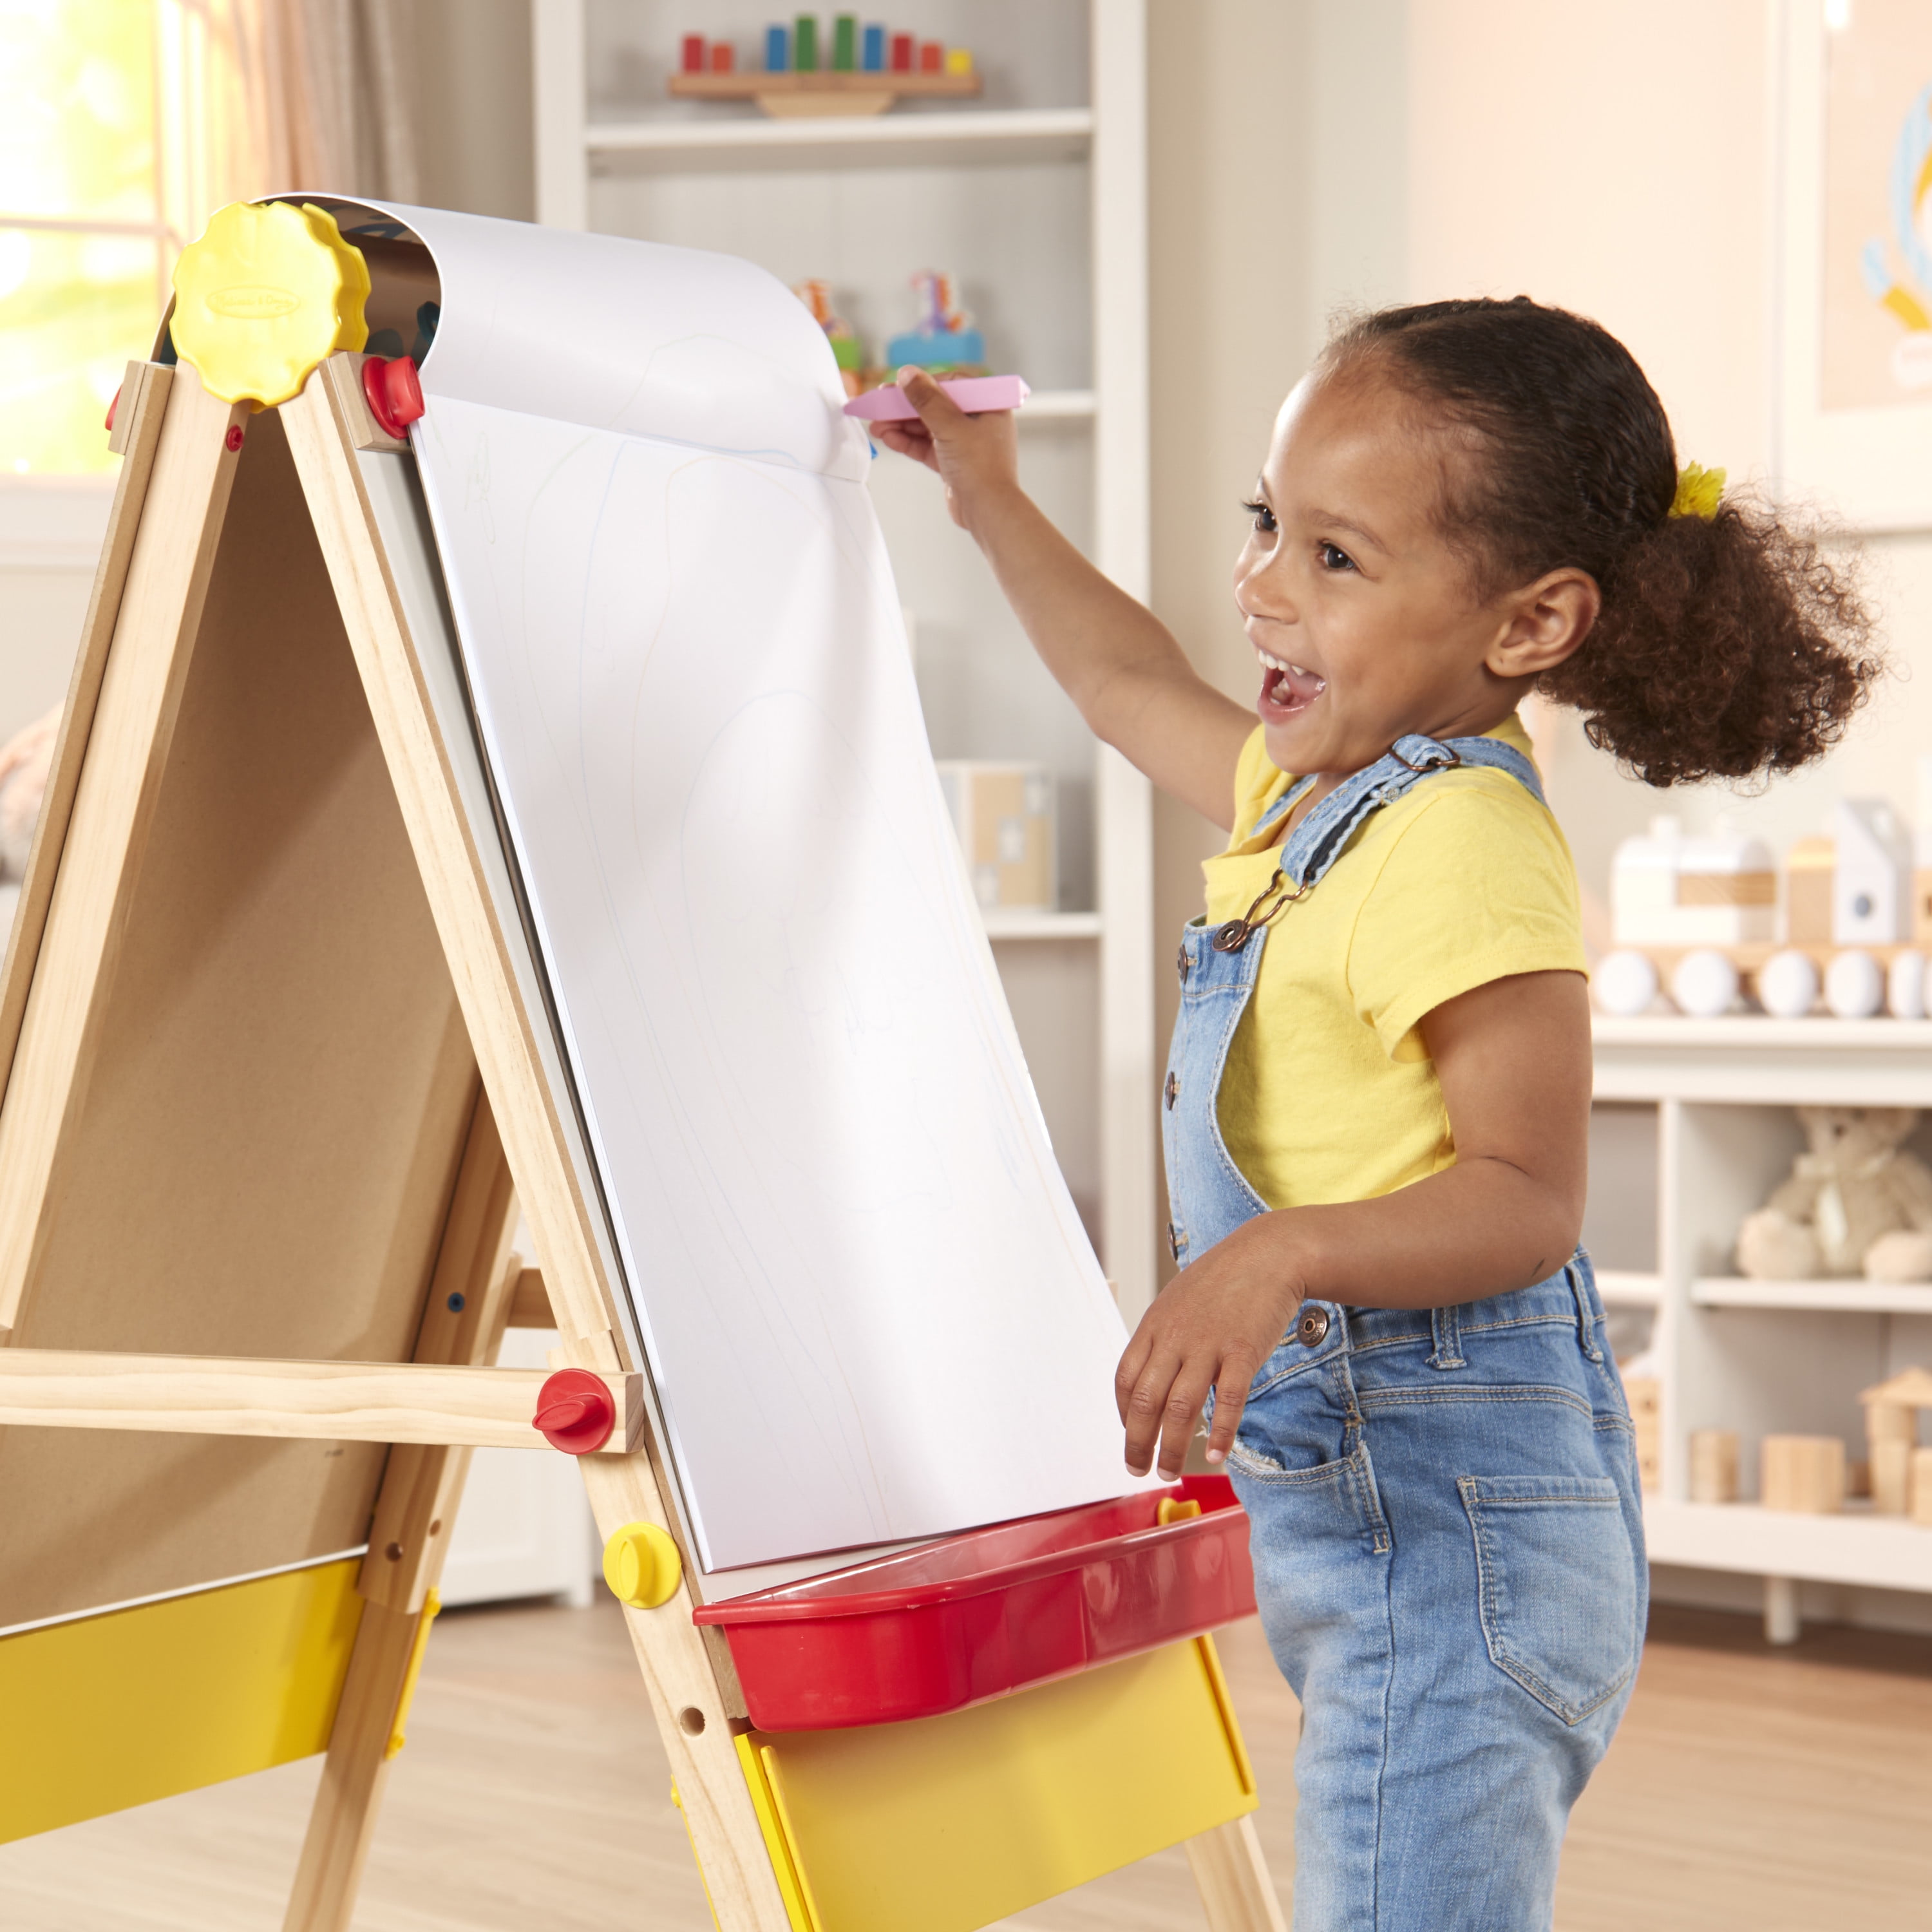 Melissa & Doug Easel Pad Bundle 50 Sheets 2-Pack - Large Easel Paper Pad  For Classrooms